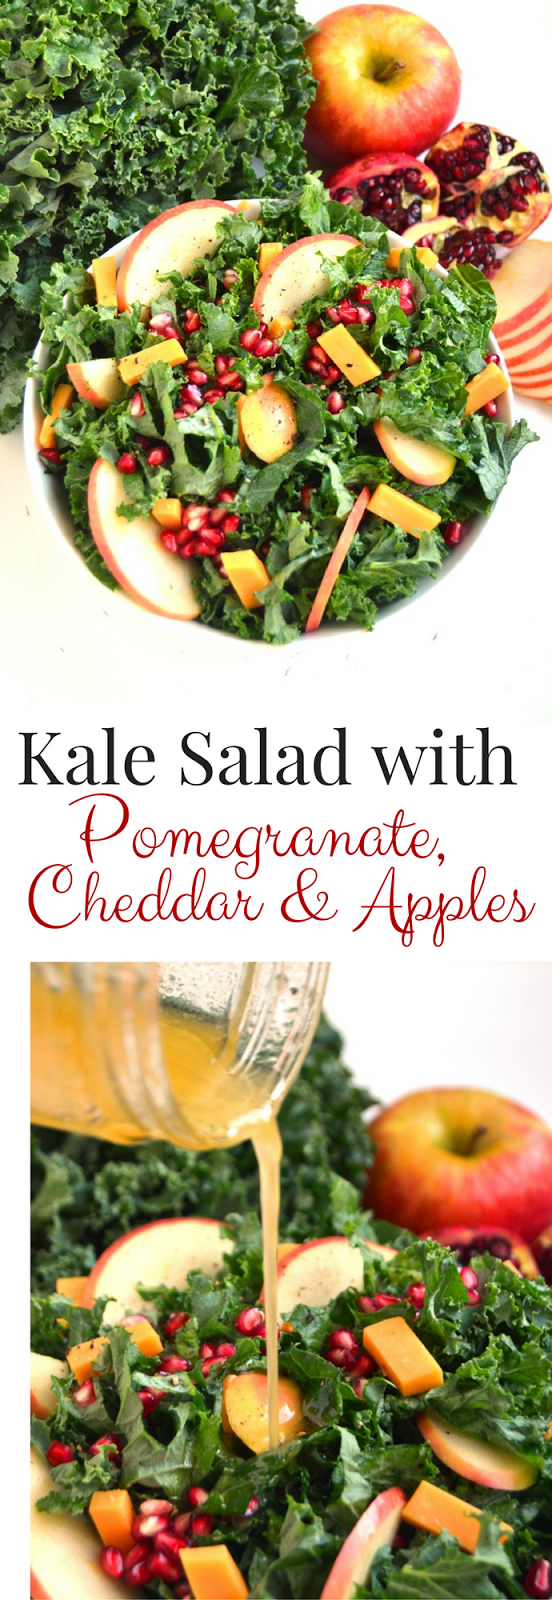 Kale Salad with Pomegranate, Cheddar and Apples features fresh kale, pomegranates, apples and cheddar cheese with a homemade apple cider vinaigrette for the perfect hearty salad! www.nutritionistreviews.com